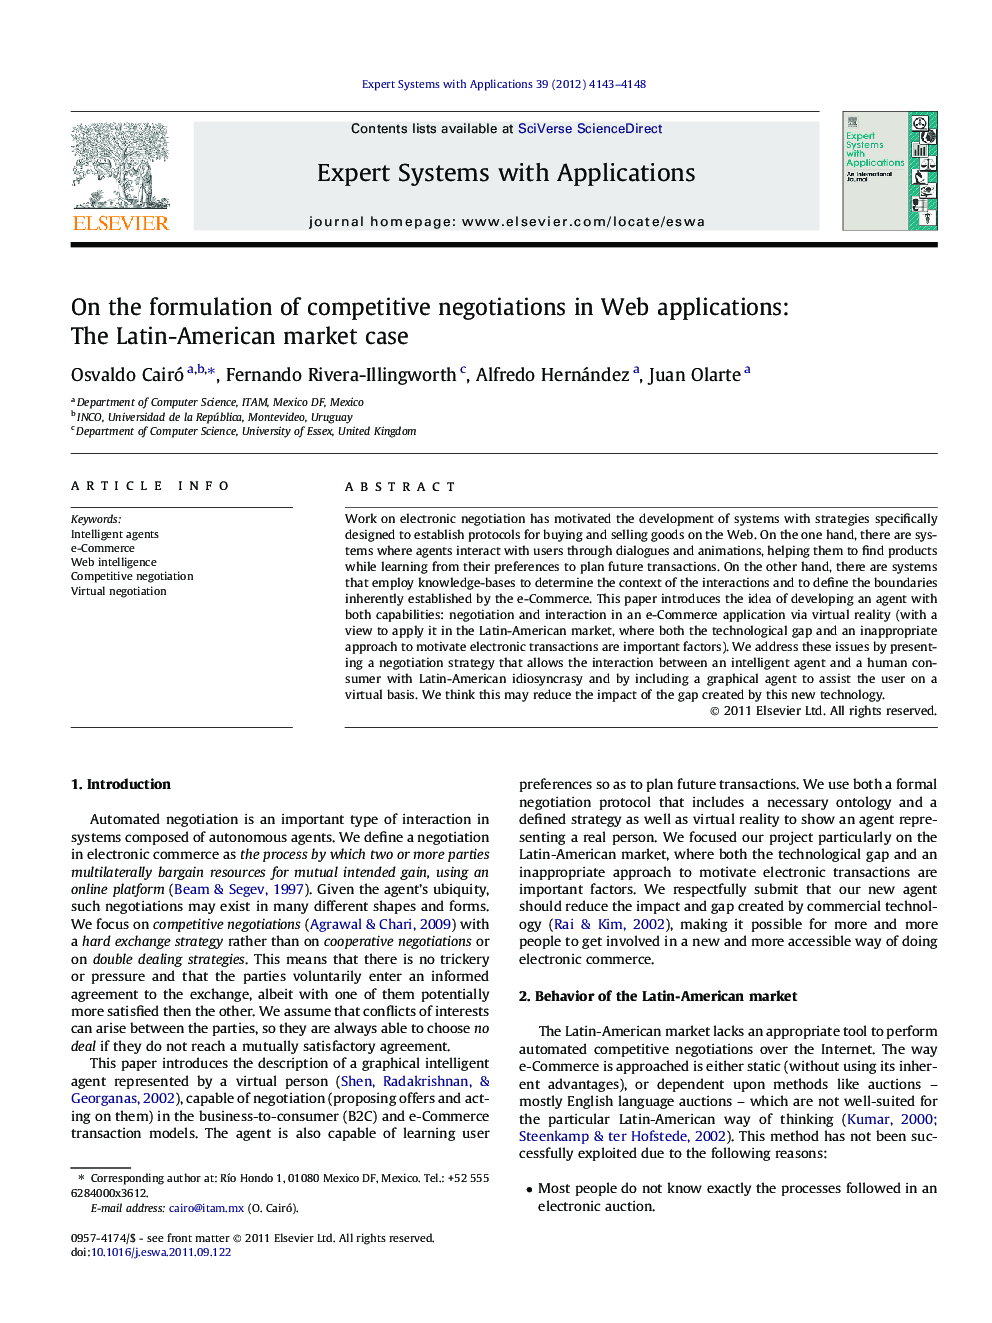 On the formulation of competitive negotiations in Web applications: The Latin-American market case